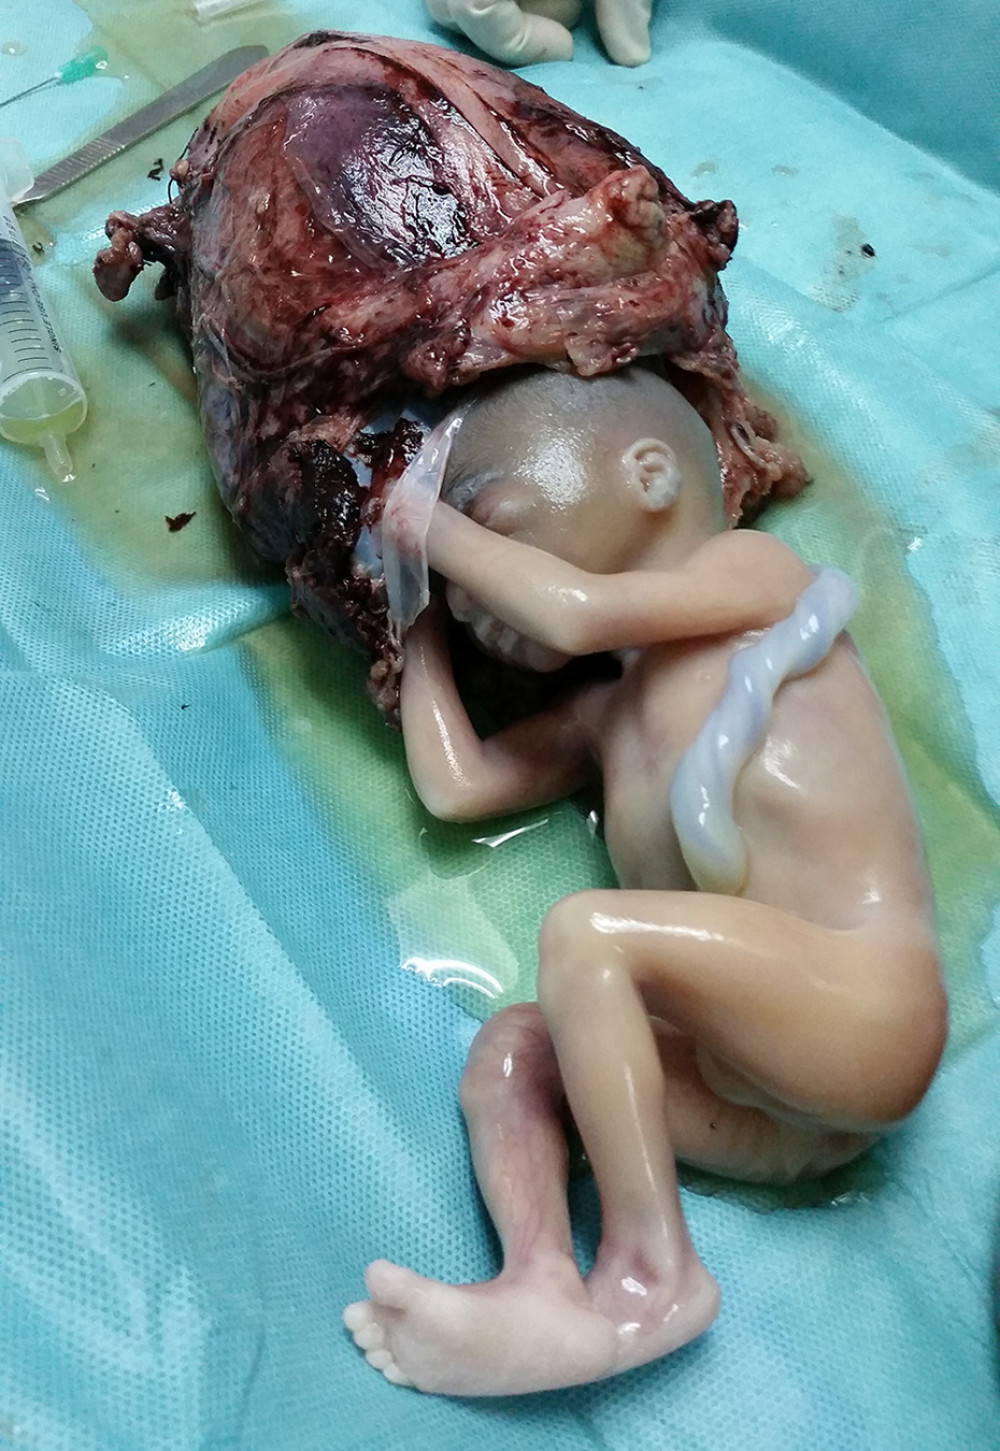 Stillbirth protruding out after iatrogenic rupture of the amniotic sac.